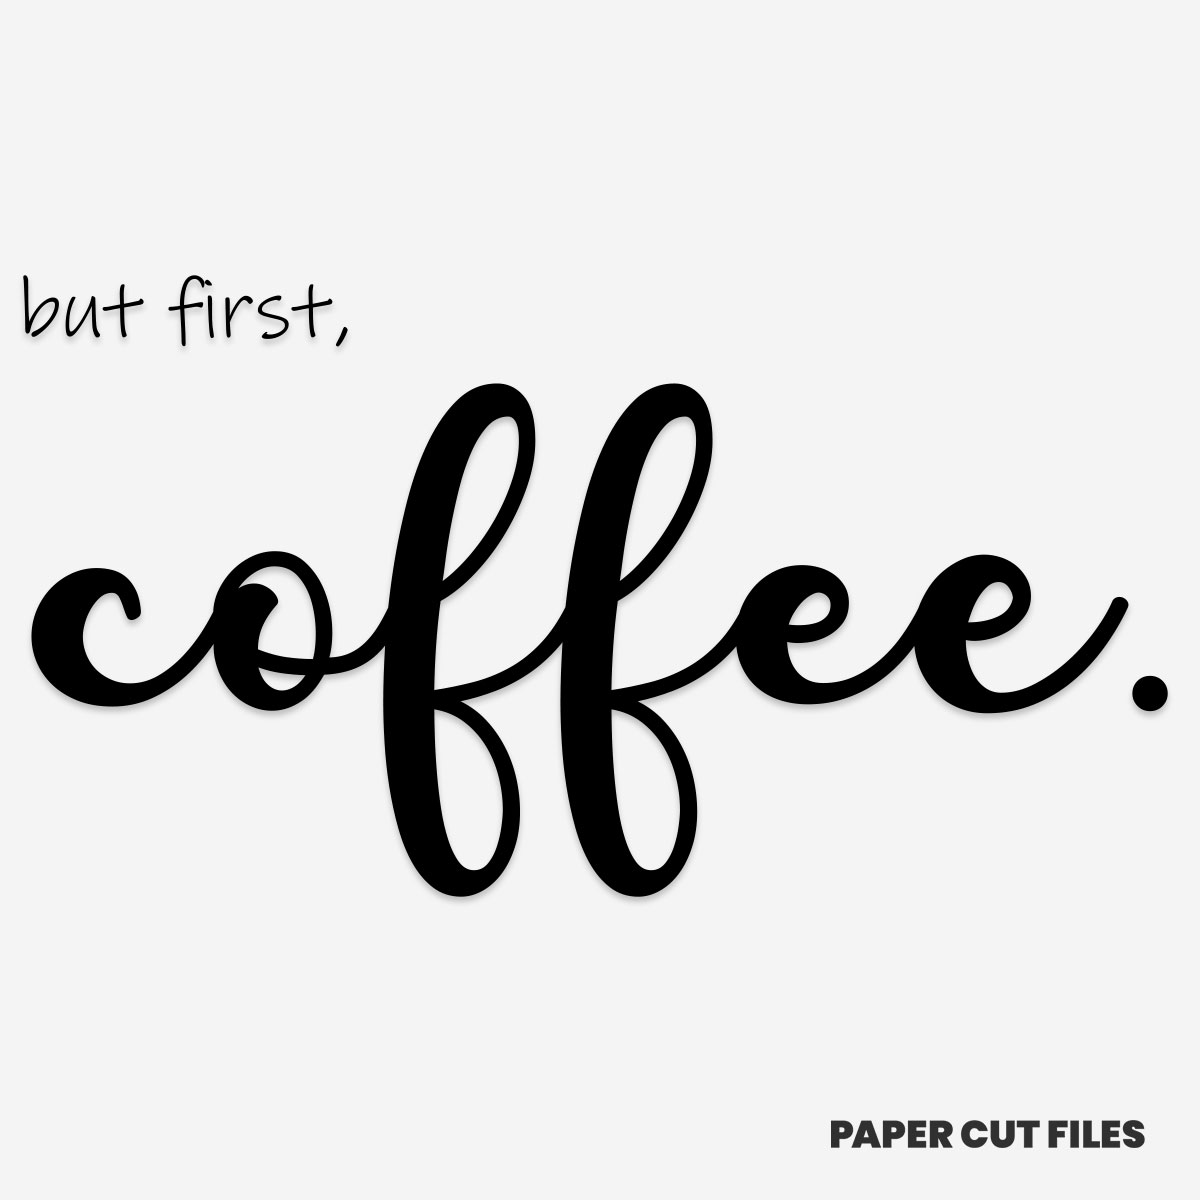 Download 'But first, coffee' quote - Free SVG & PNG | PaperCut Files